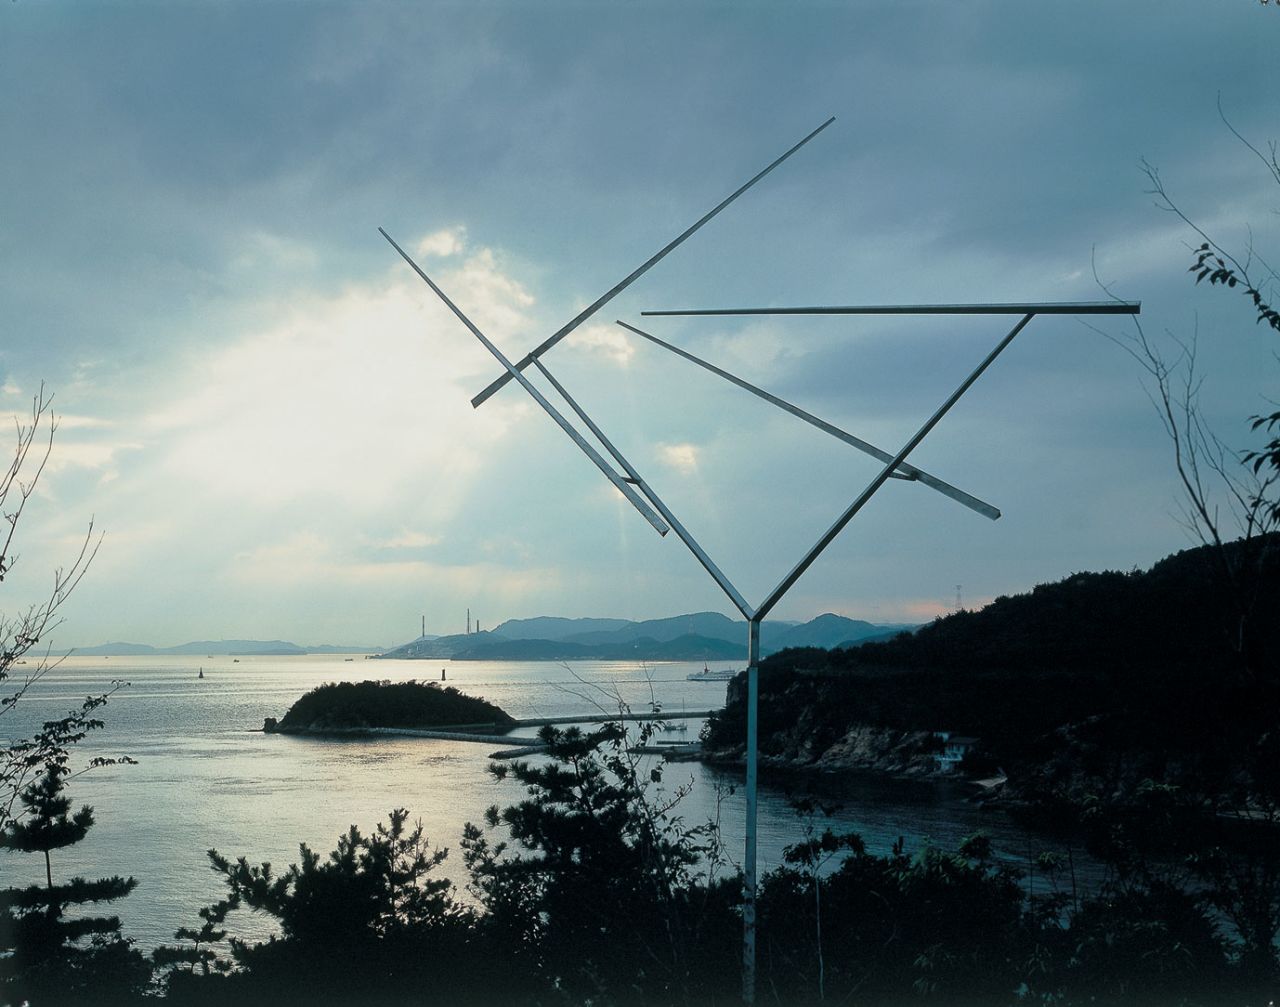 Naoshima is reached by ferry from the ports of Uno and Takamatsu. The southern side of the island is studded with sculptures, such as George Rickey's kinetic "Four Lines" (pictured), and stunning architecture set against a beautiful sea backdrop. 